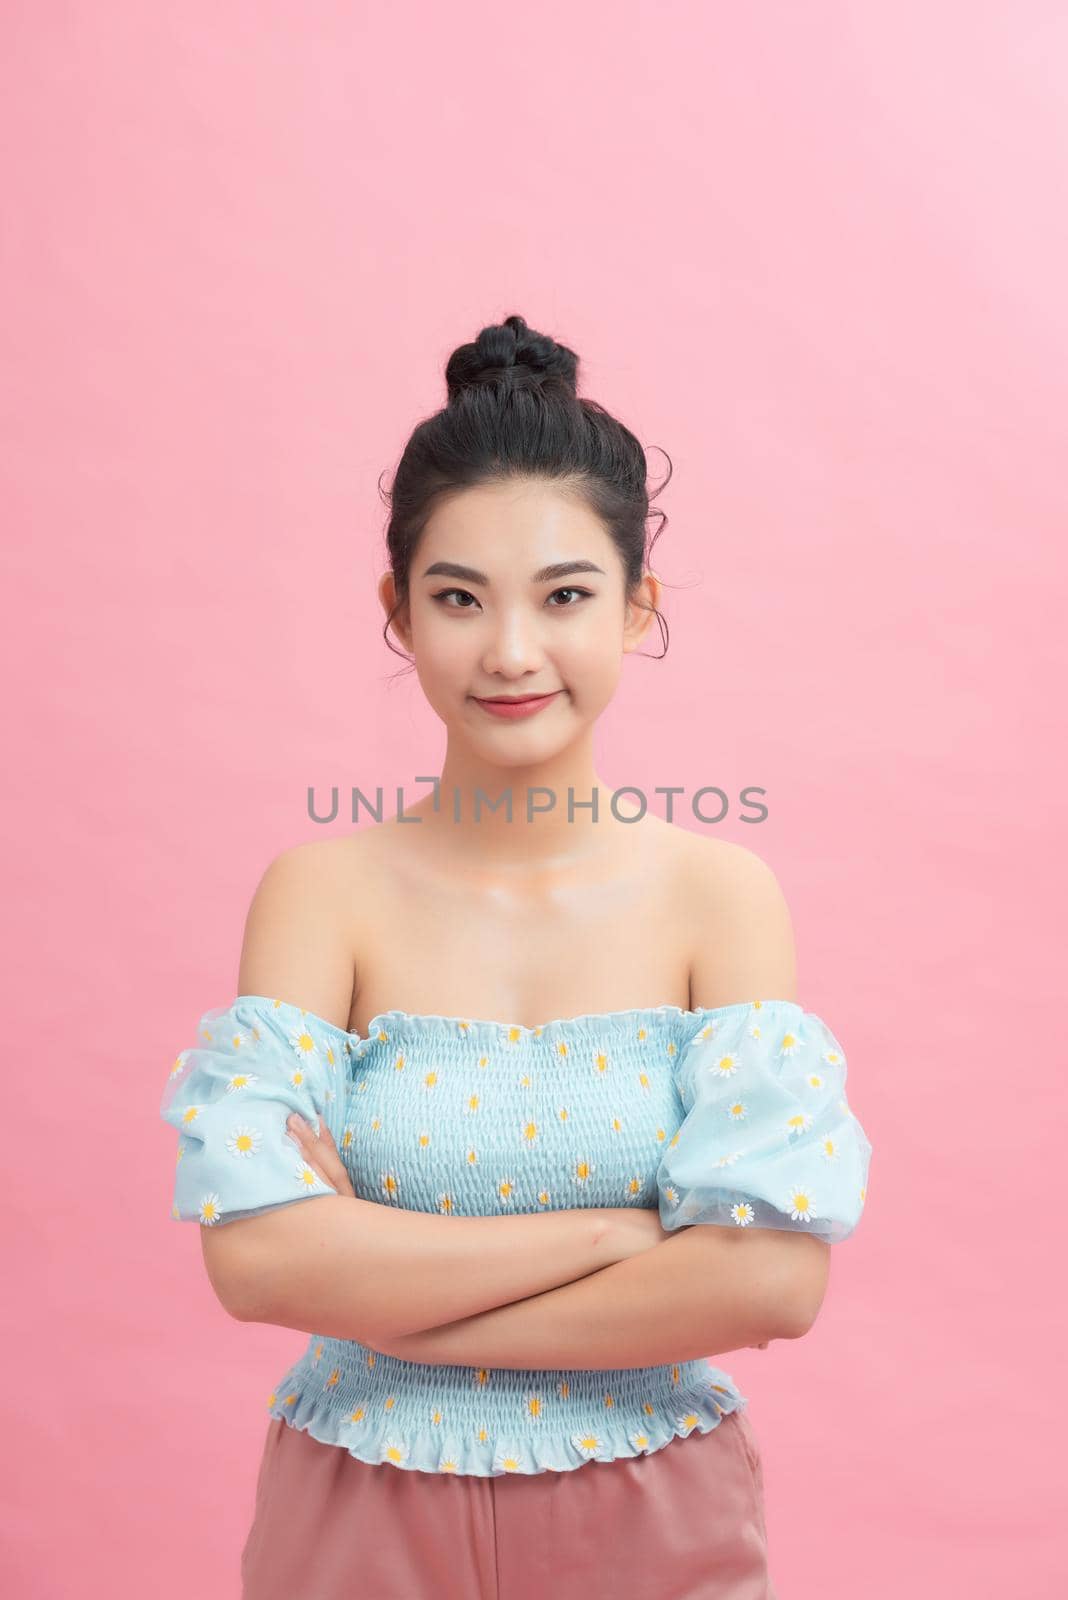 Smiling beautiful woman portrait with crossed arms on pink background by makidotvn